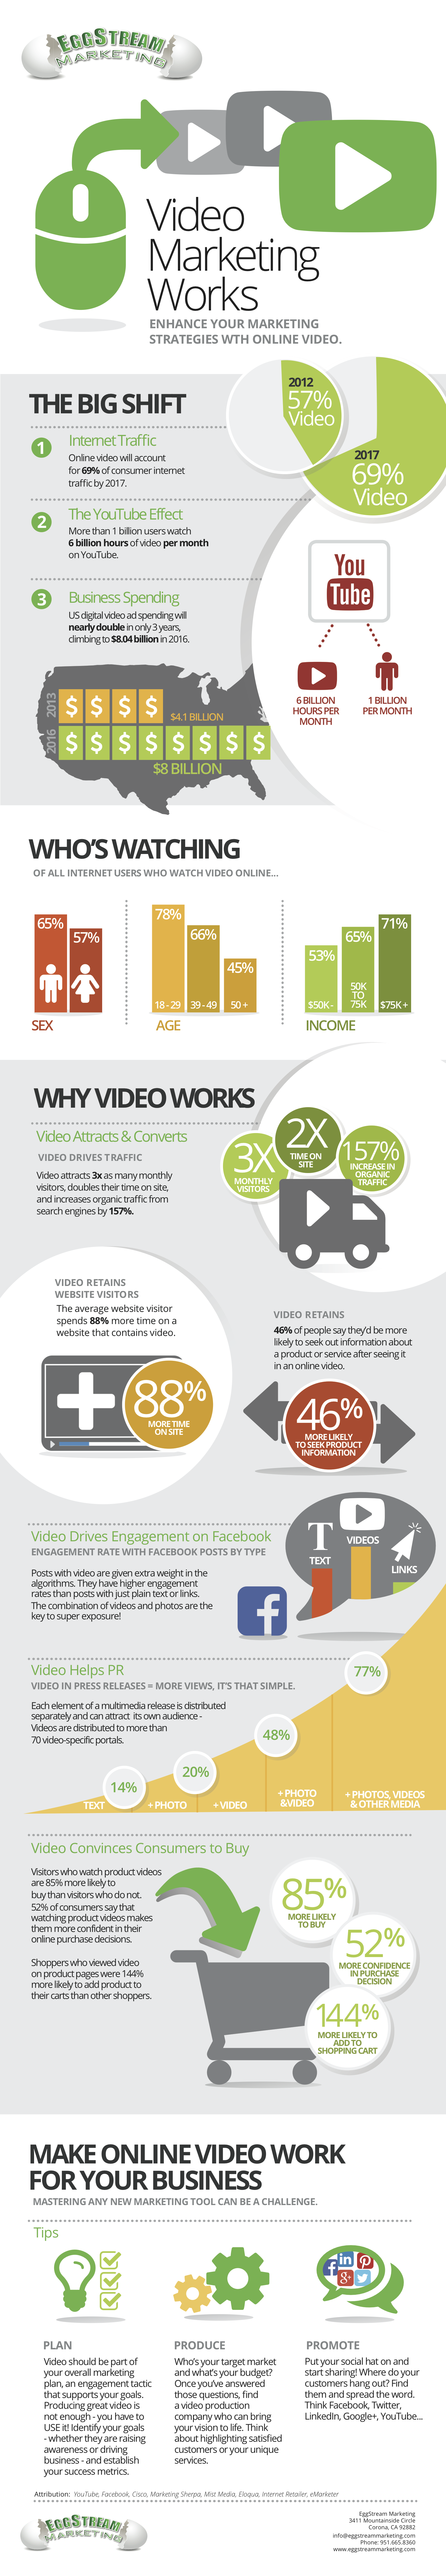 Learn how video marketing works. Infographic provided by EggStream Marketing for dentists, aesthetic and medical practices.